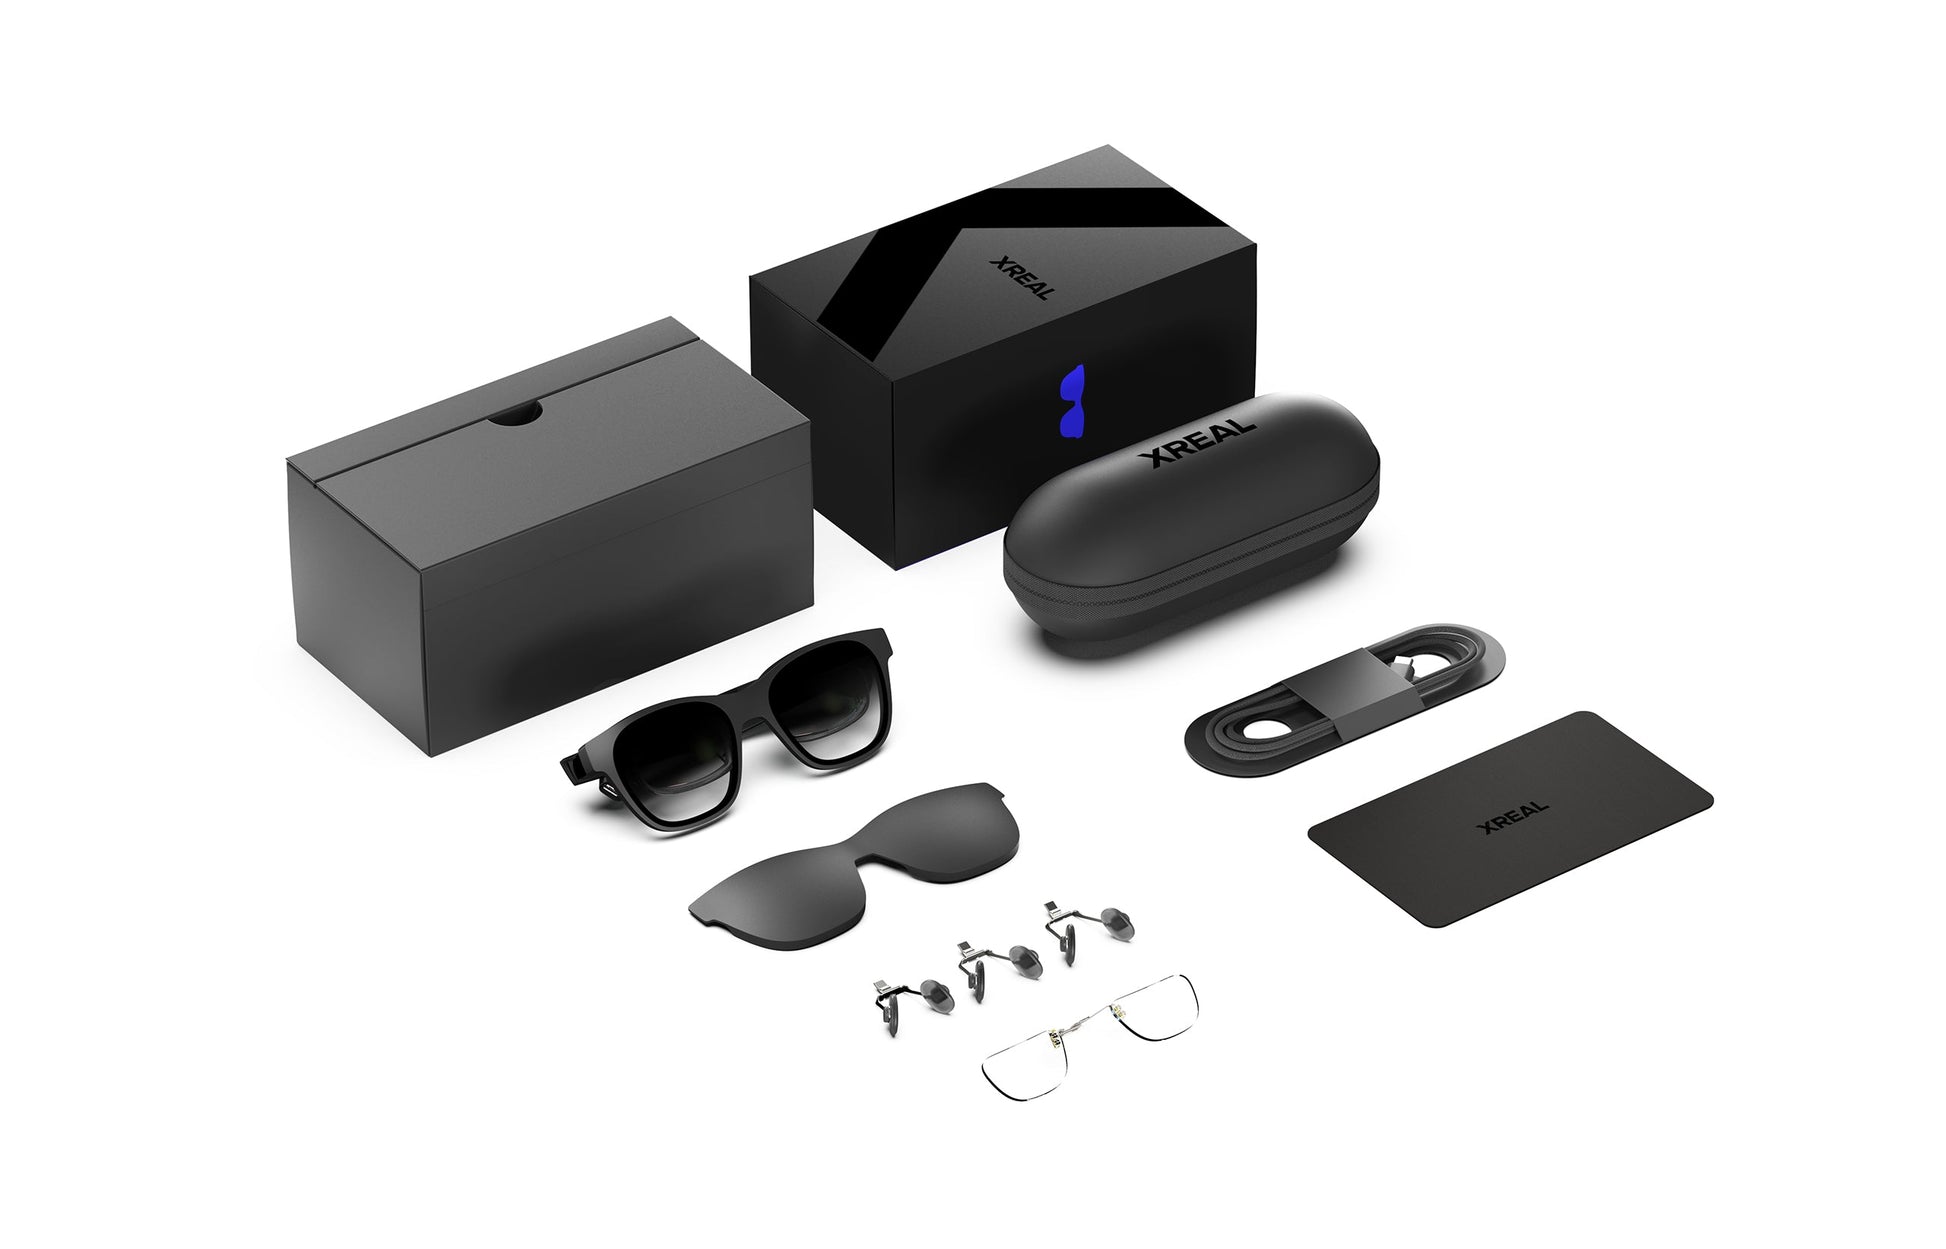 Xreal's $399 Air 2 Augmented Reality Glasses Available for Pre-Order